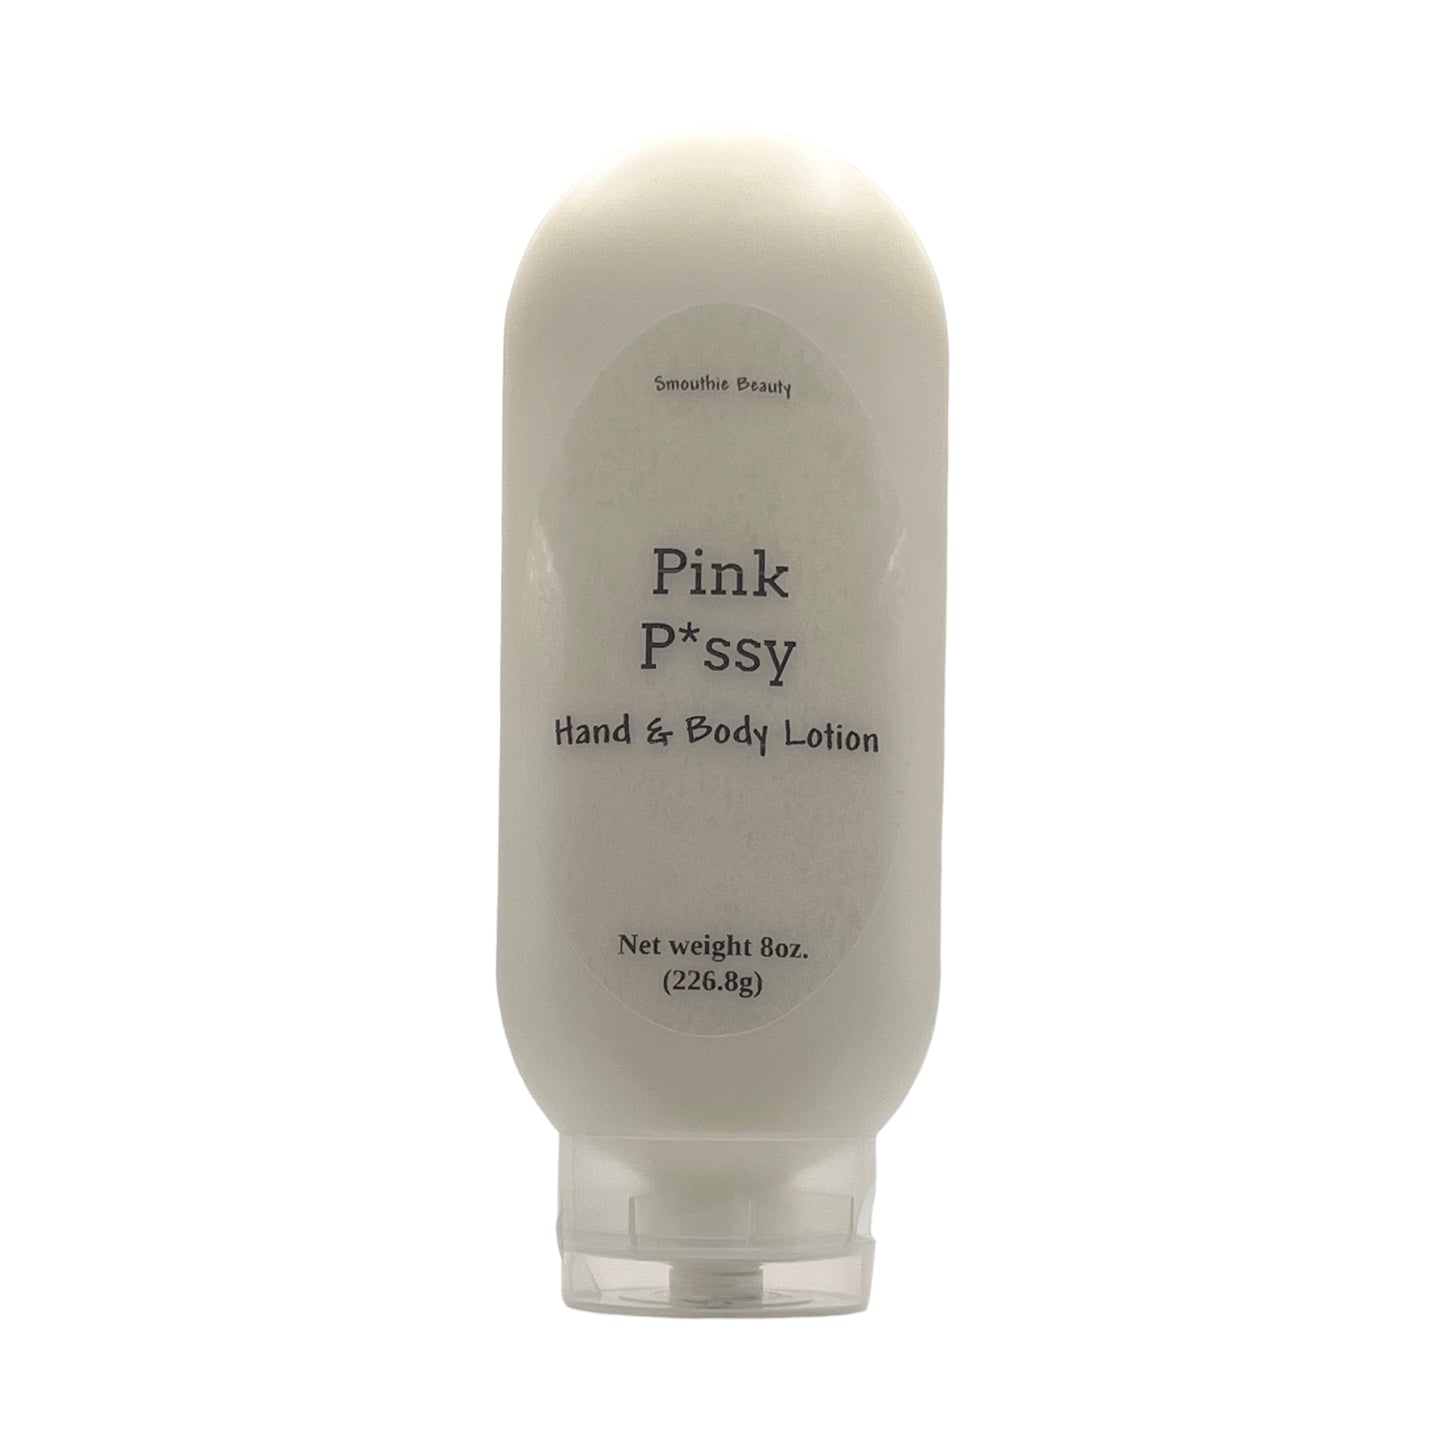 Pink P*ssy Hand & Body Lotion